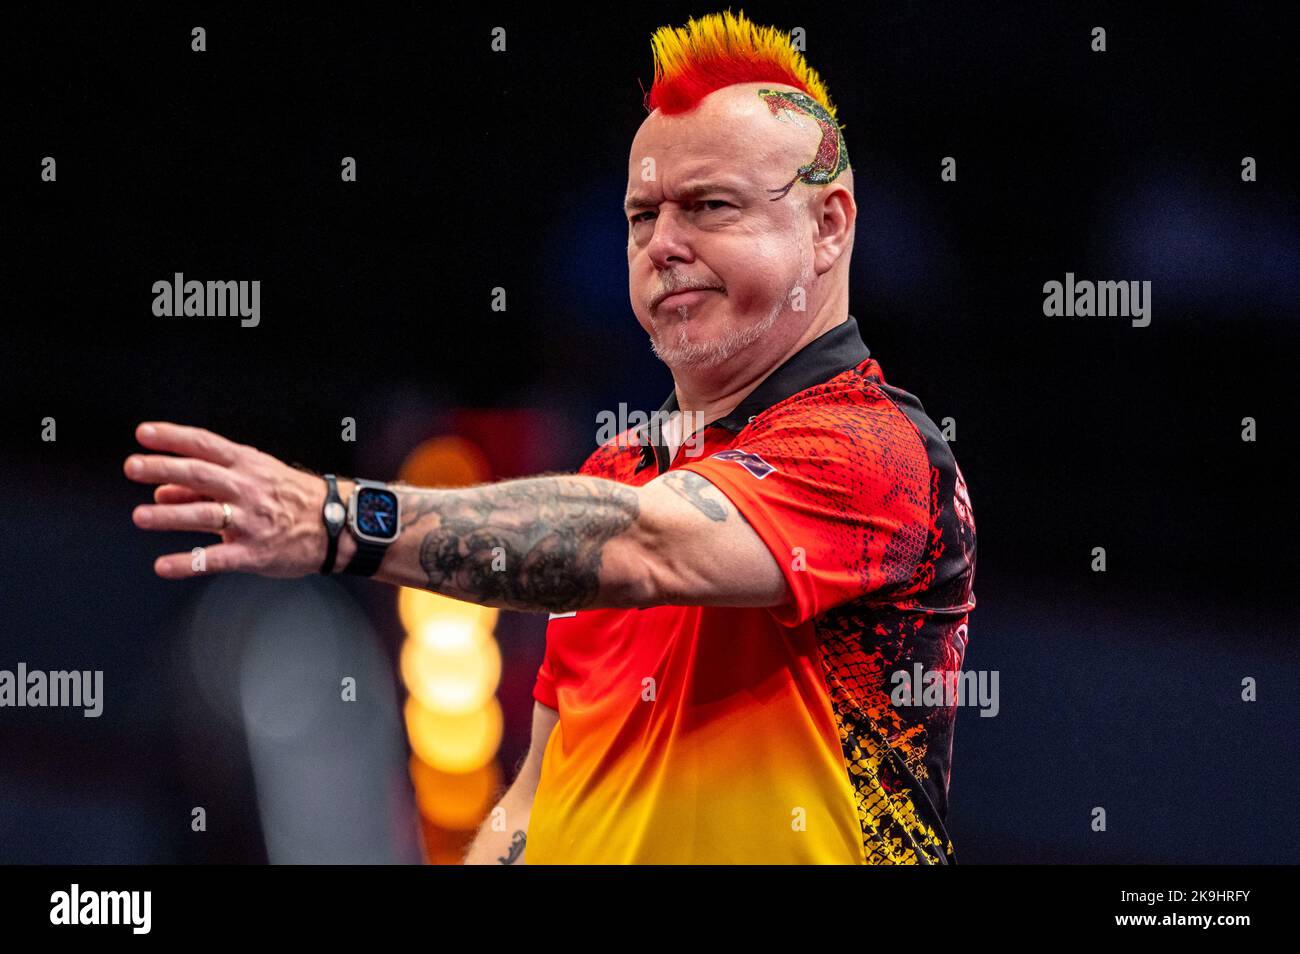 Dortmund, Germany. 28th Oct, 2022. Darts, European Darts Championship, European Darts Championship of the Professional Darts Corporation in the Westfalenhalle: Peter Wright cheers after the win over Ryan Meikle. Credit: David Inderlied/dpa/Alamy Live News Stock Photo